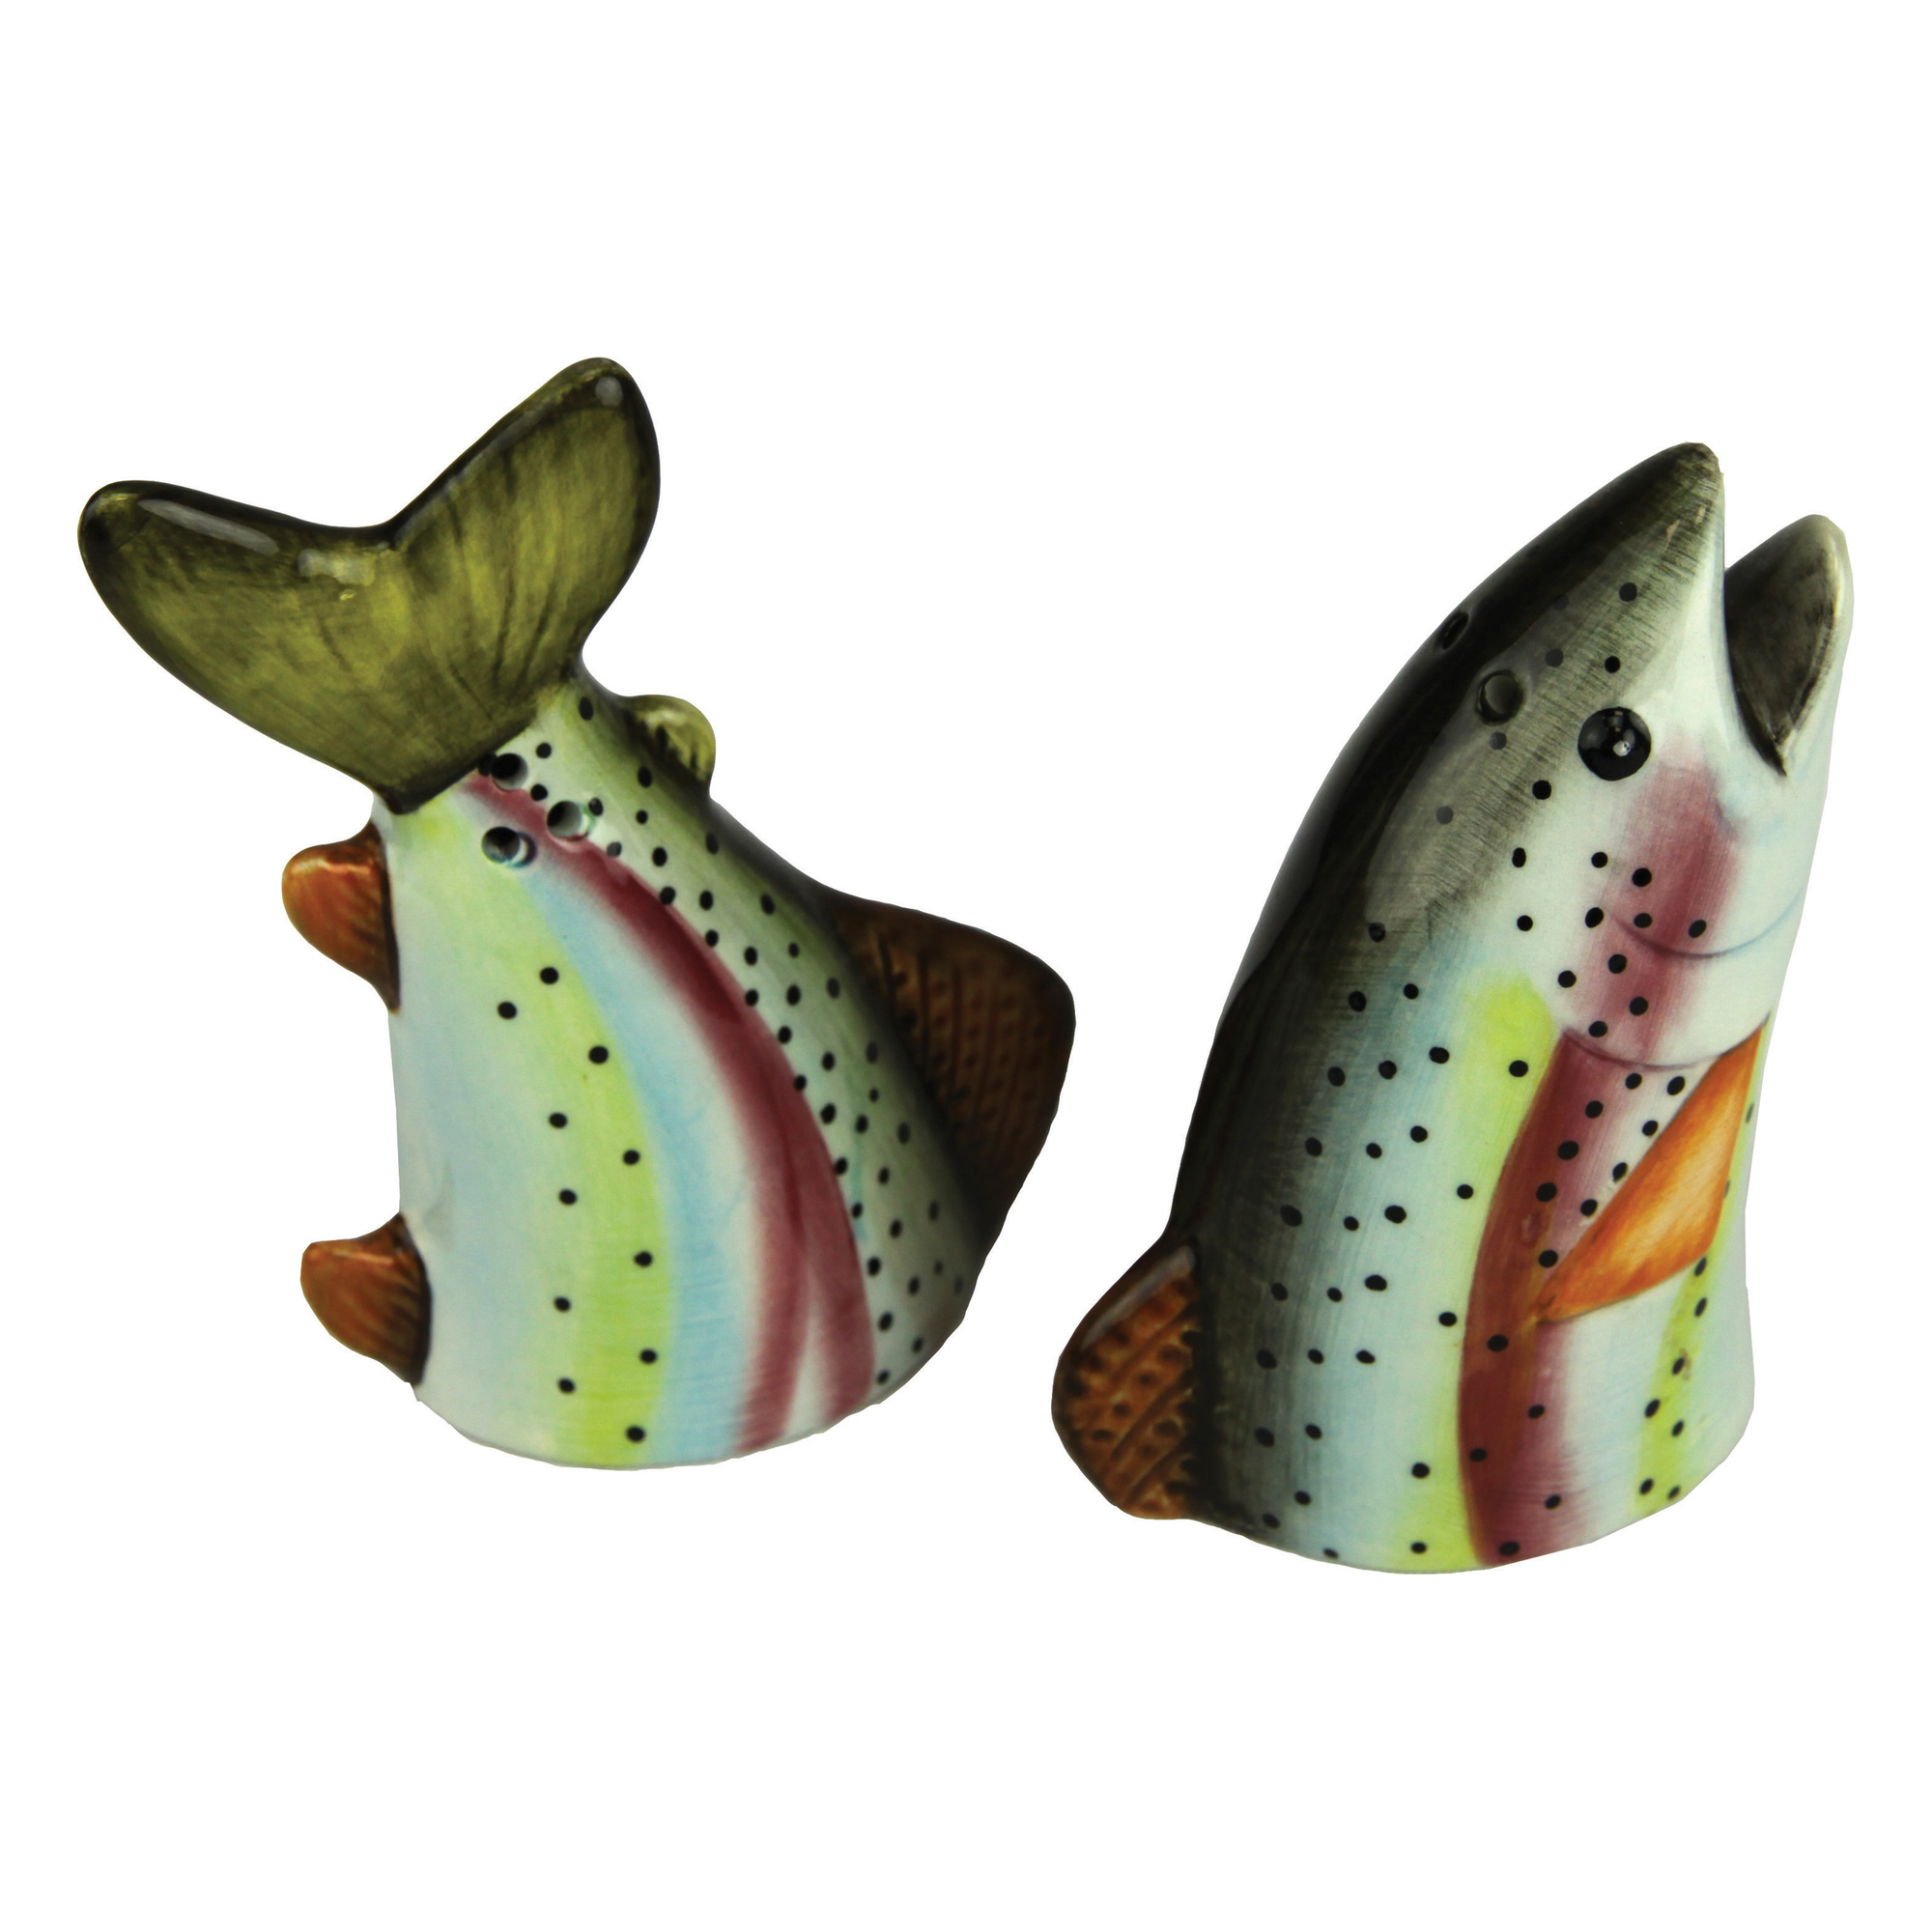 Rivers Edge 2051 Salt and Pepper Shakers - Trout